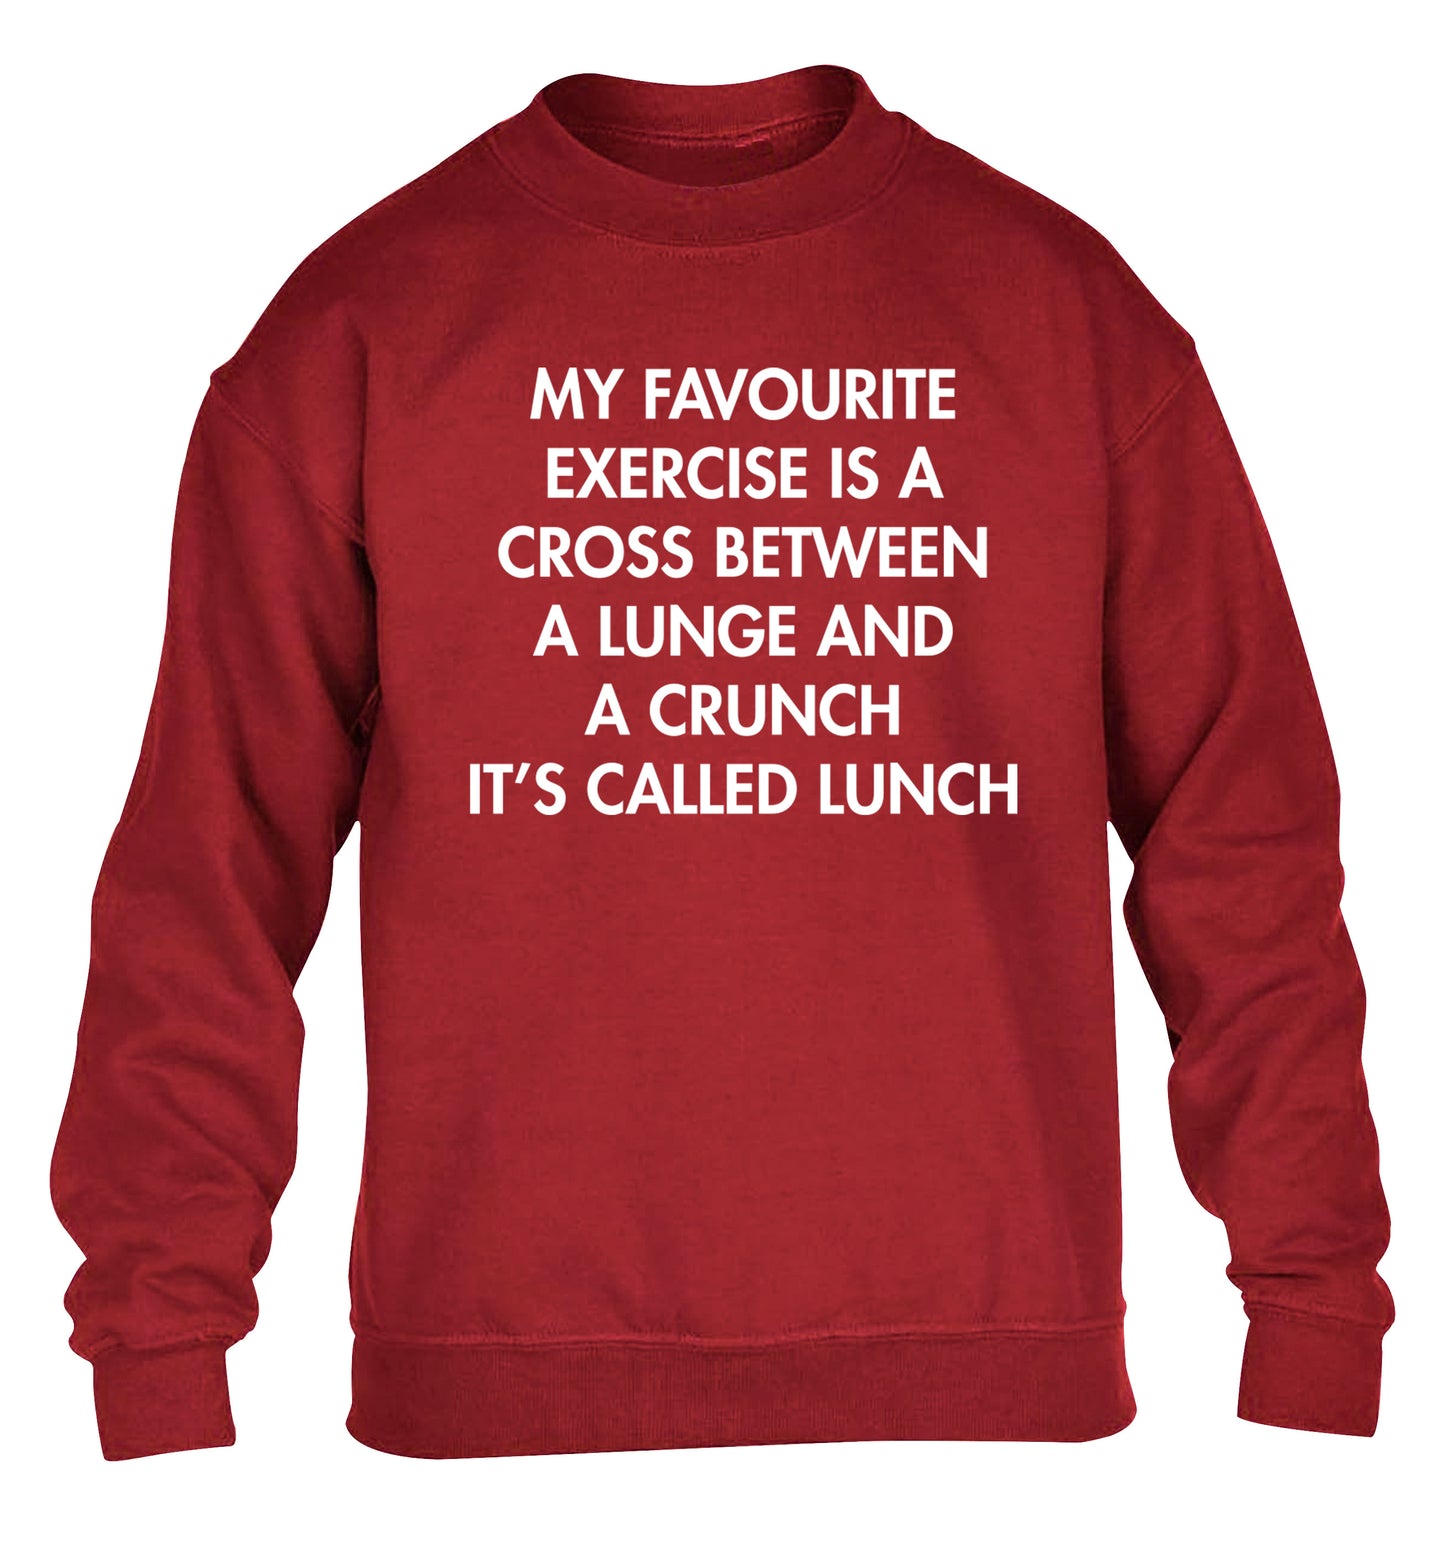 My favourite exercise is a cross between a lung and a crunch it's called lunch children's grey sweater 12-14 Years